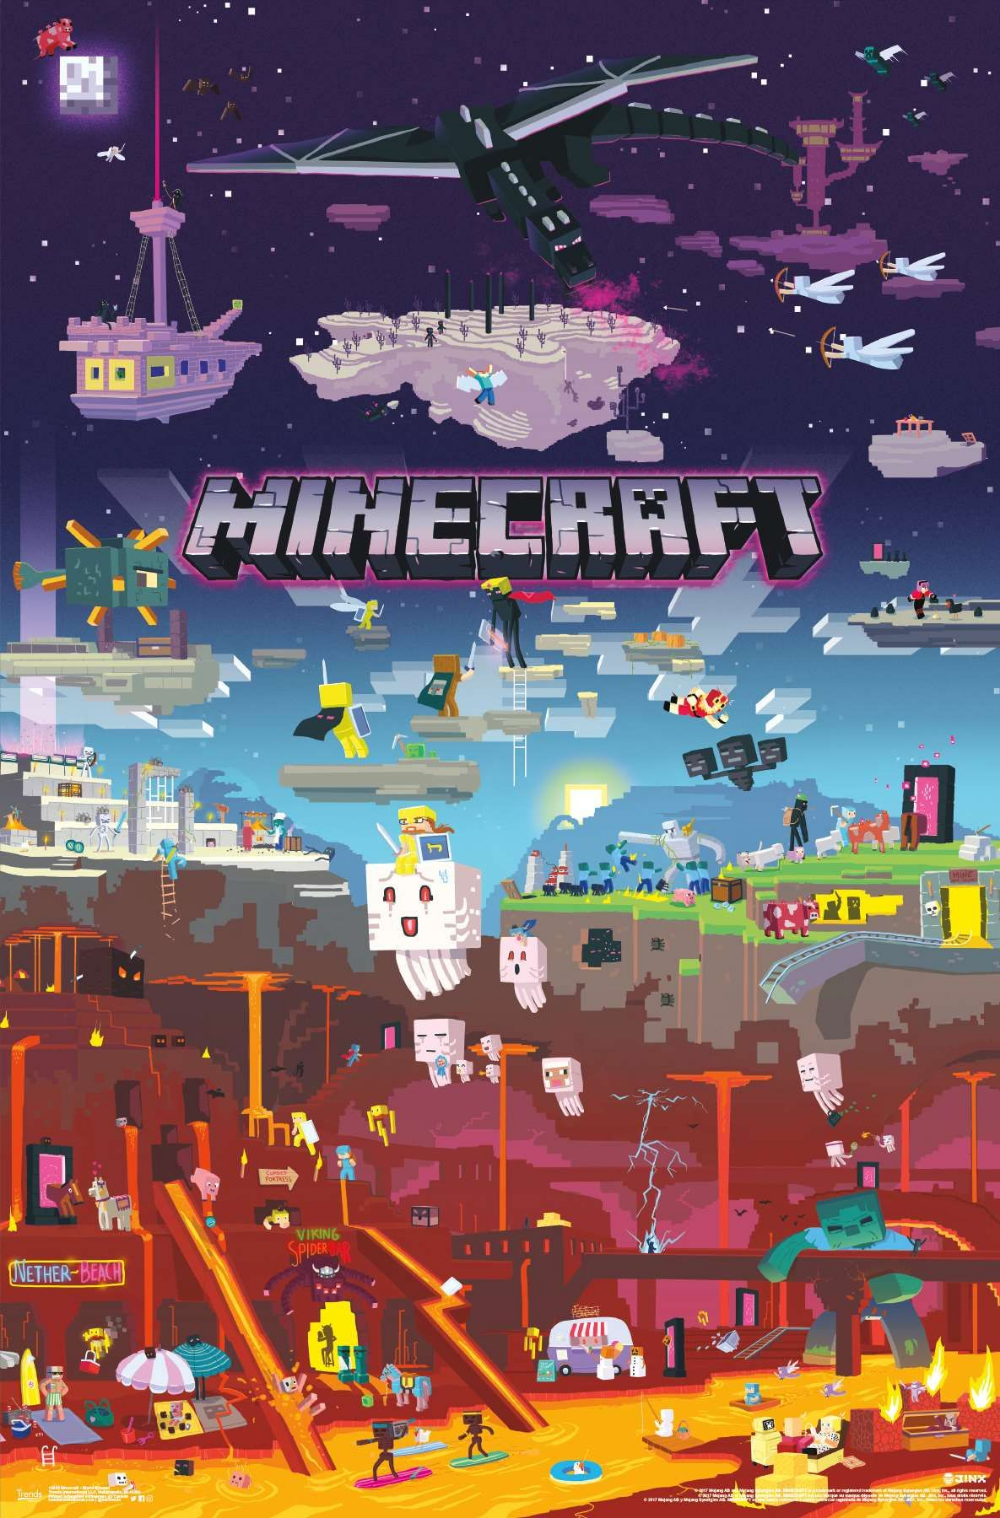 Minecraft Beyond Poster. Minecraft posters, Gaming posters, Minecraft image